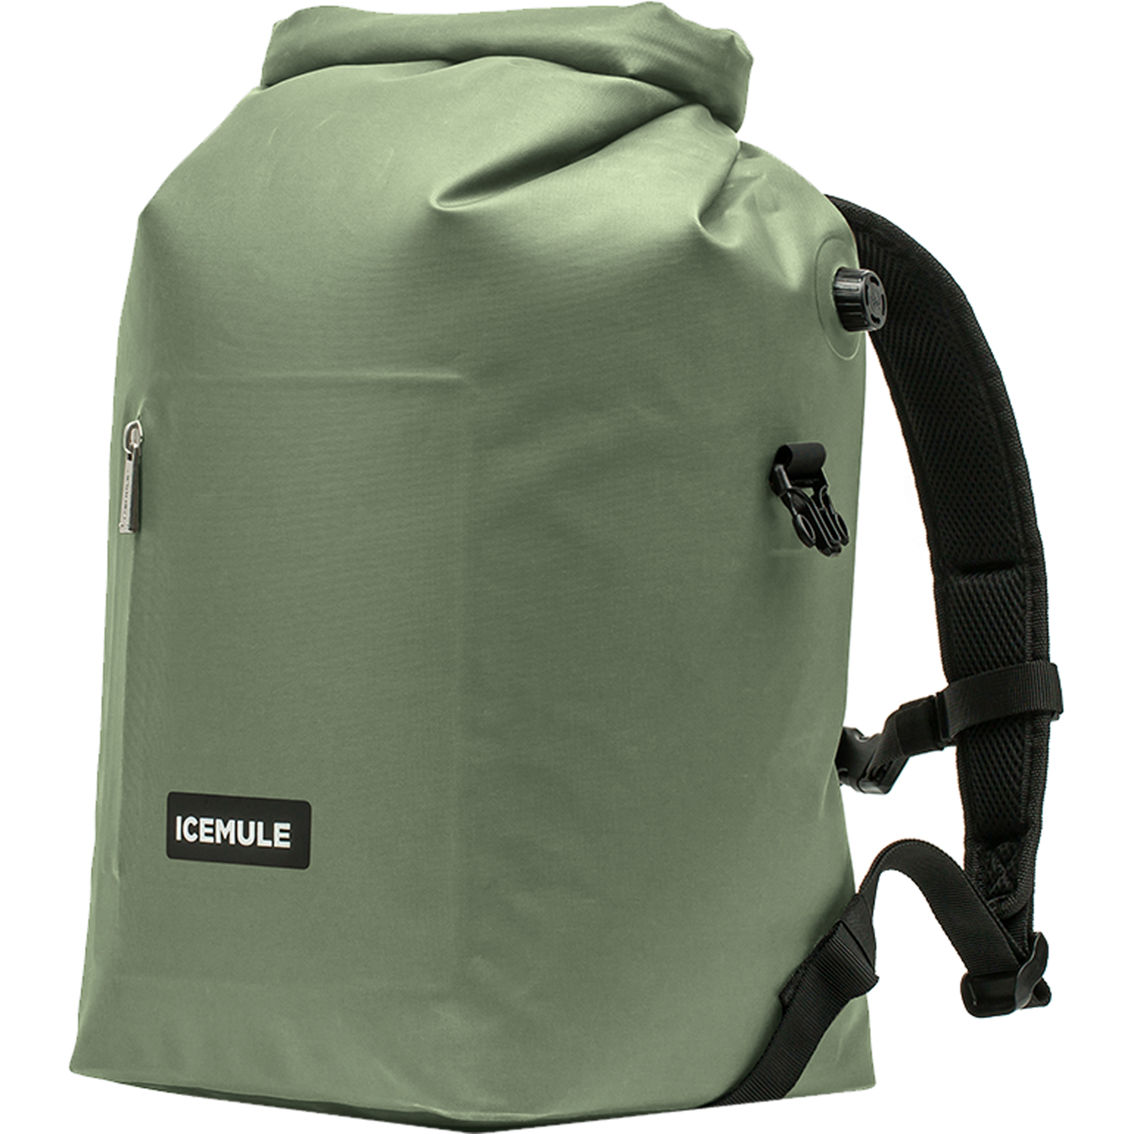 IceMule Cooler Recycled Jaunt (20L) - Image 3 of 5